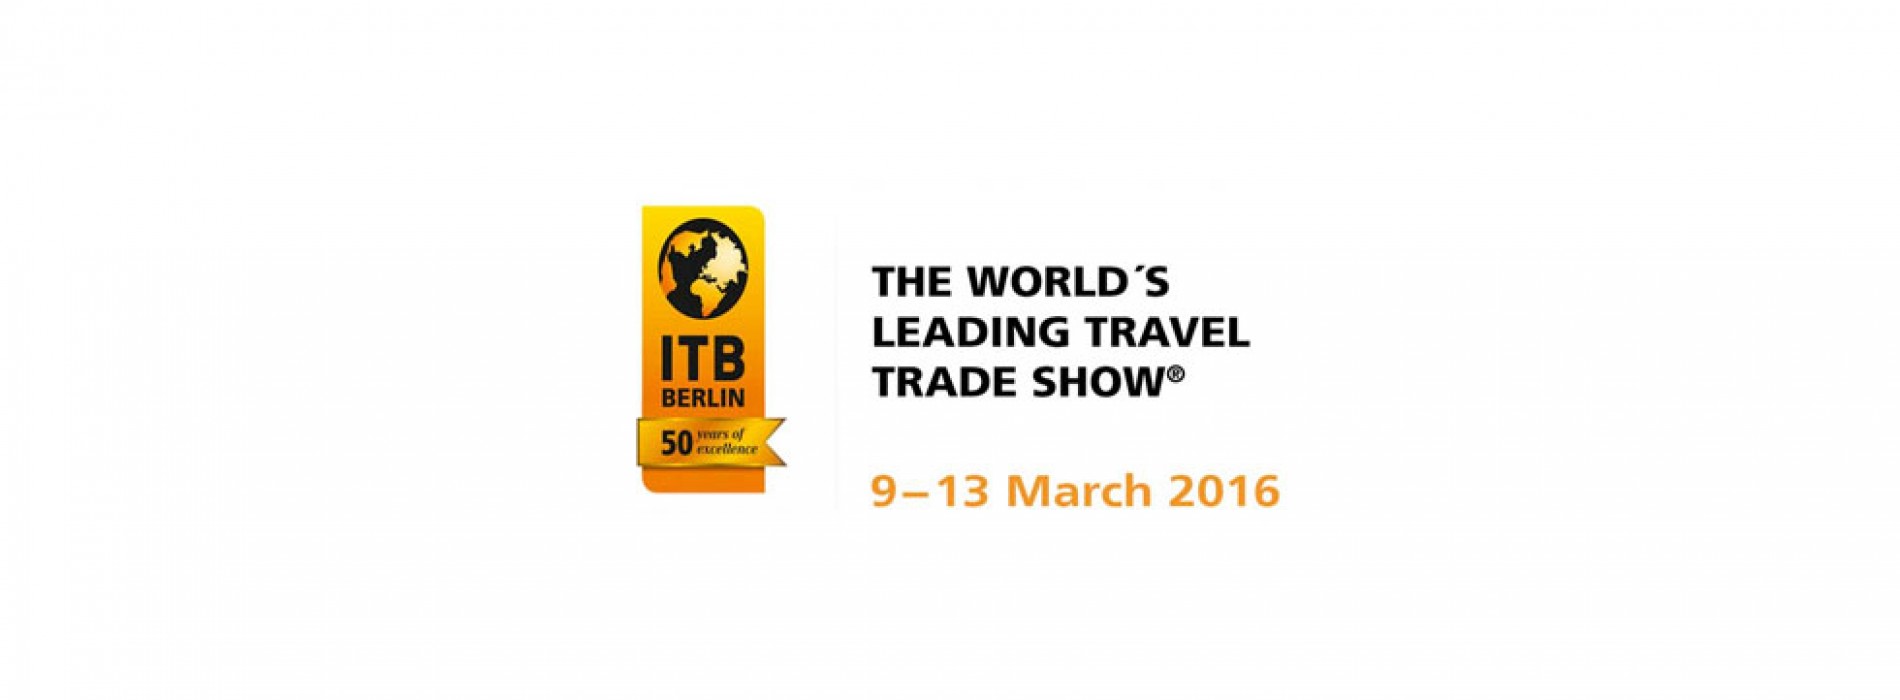 ITB Berlin 2016: Show provides strong economic boost to calm fears